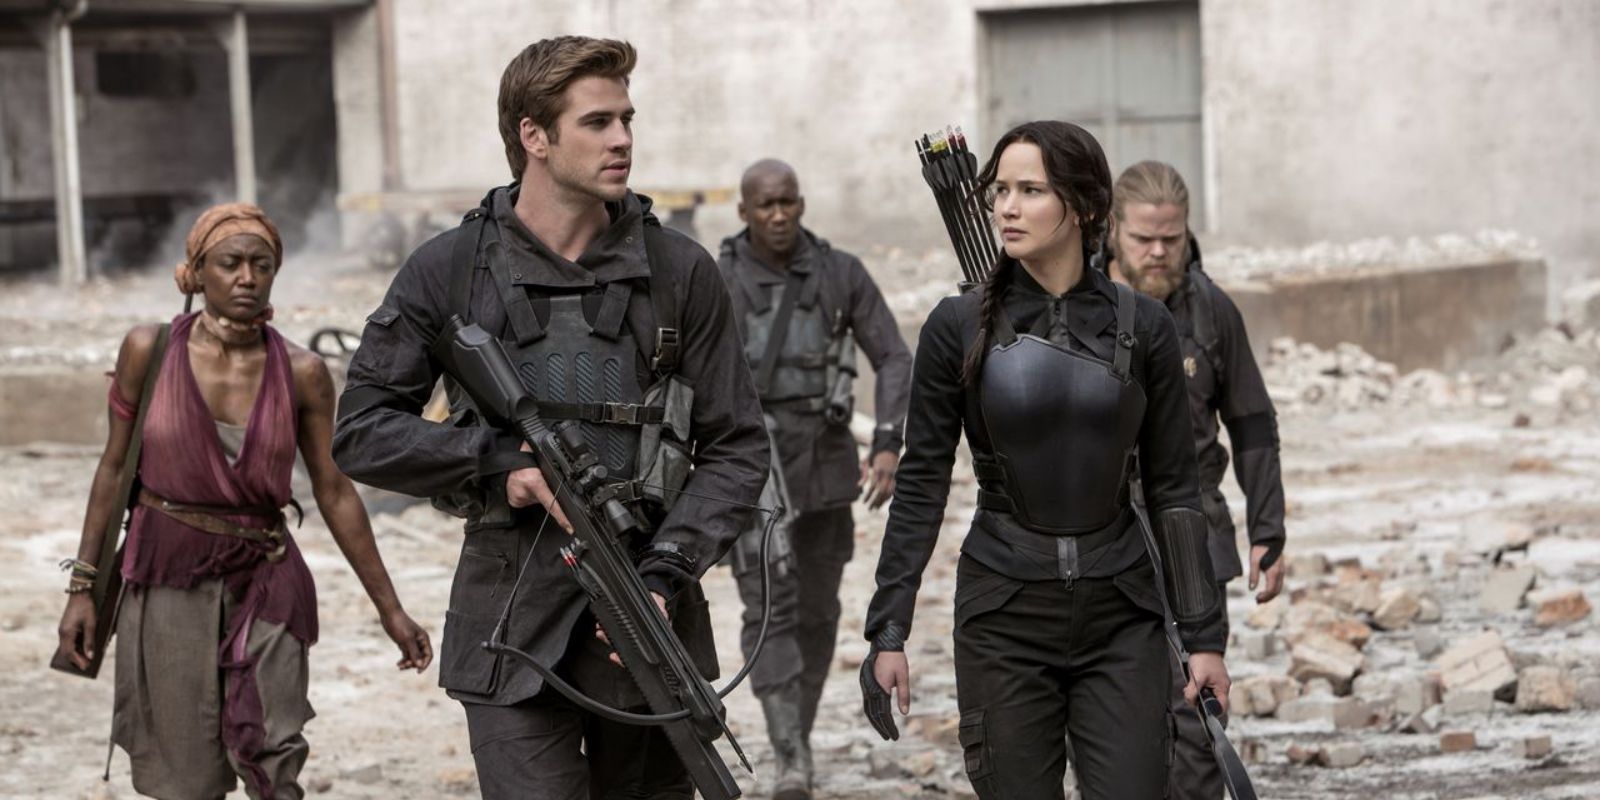 Every Hunger Games & Twilight Movie (Ranked By Metacritic)